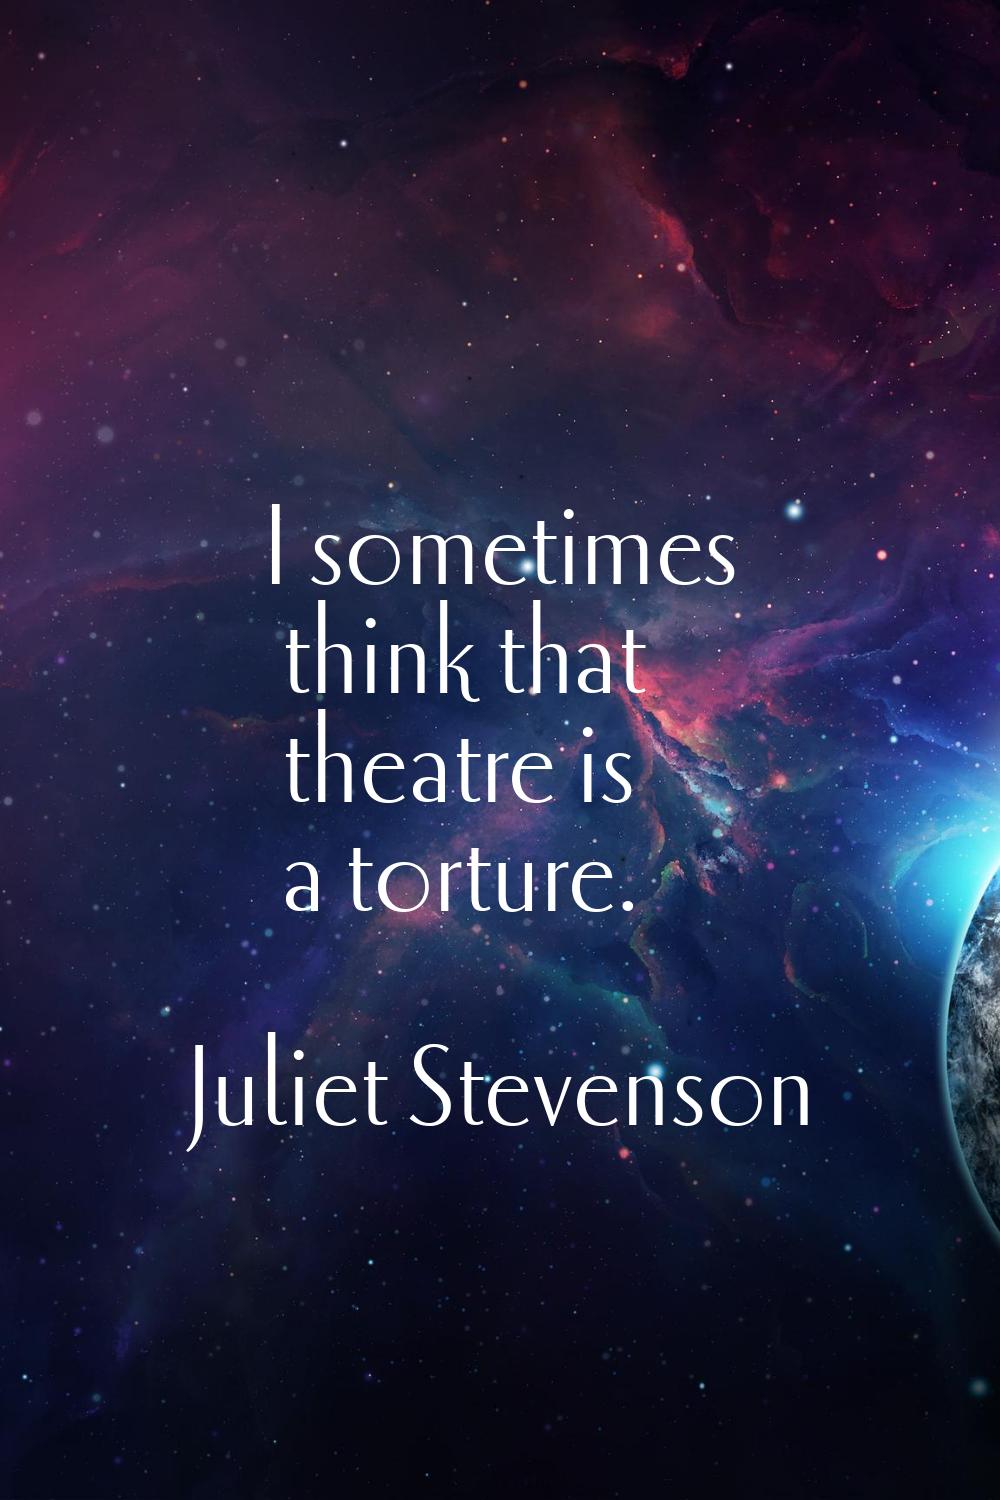 I sometimes think that theatre is a torture.